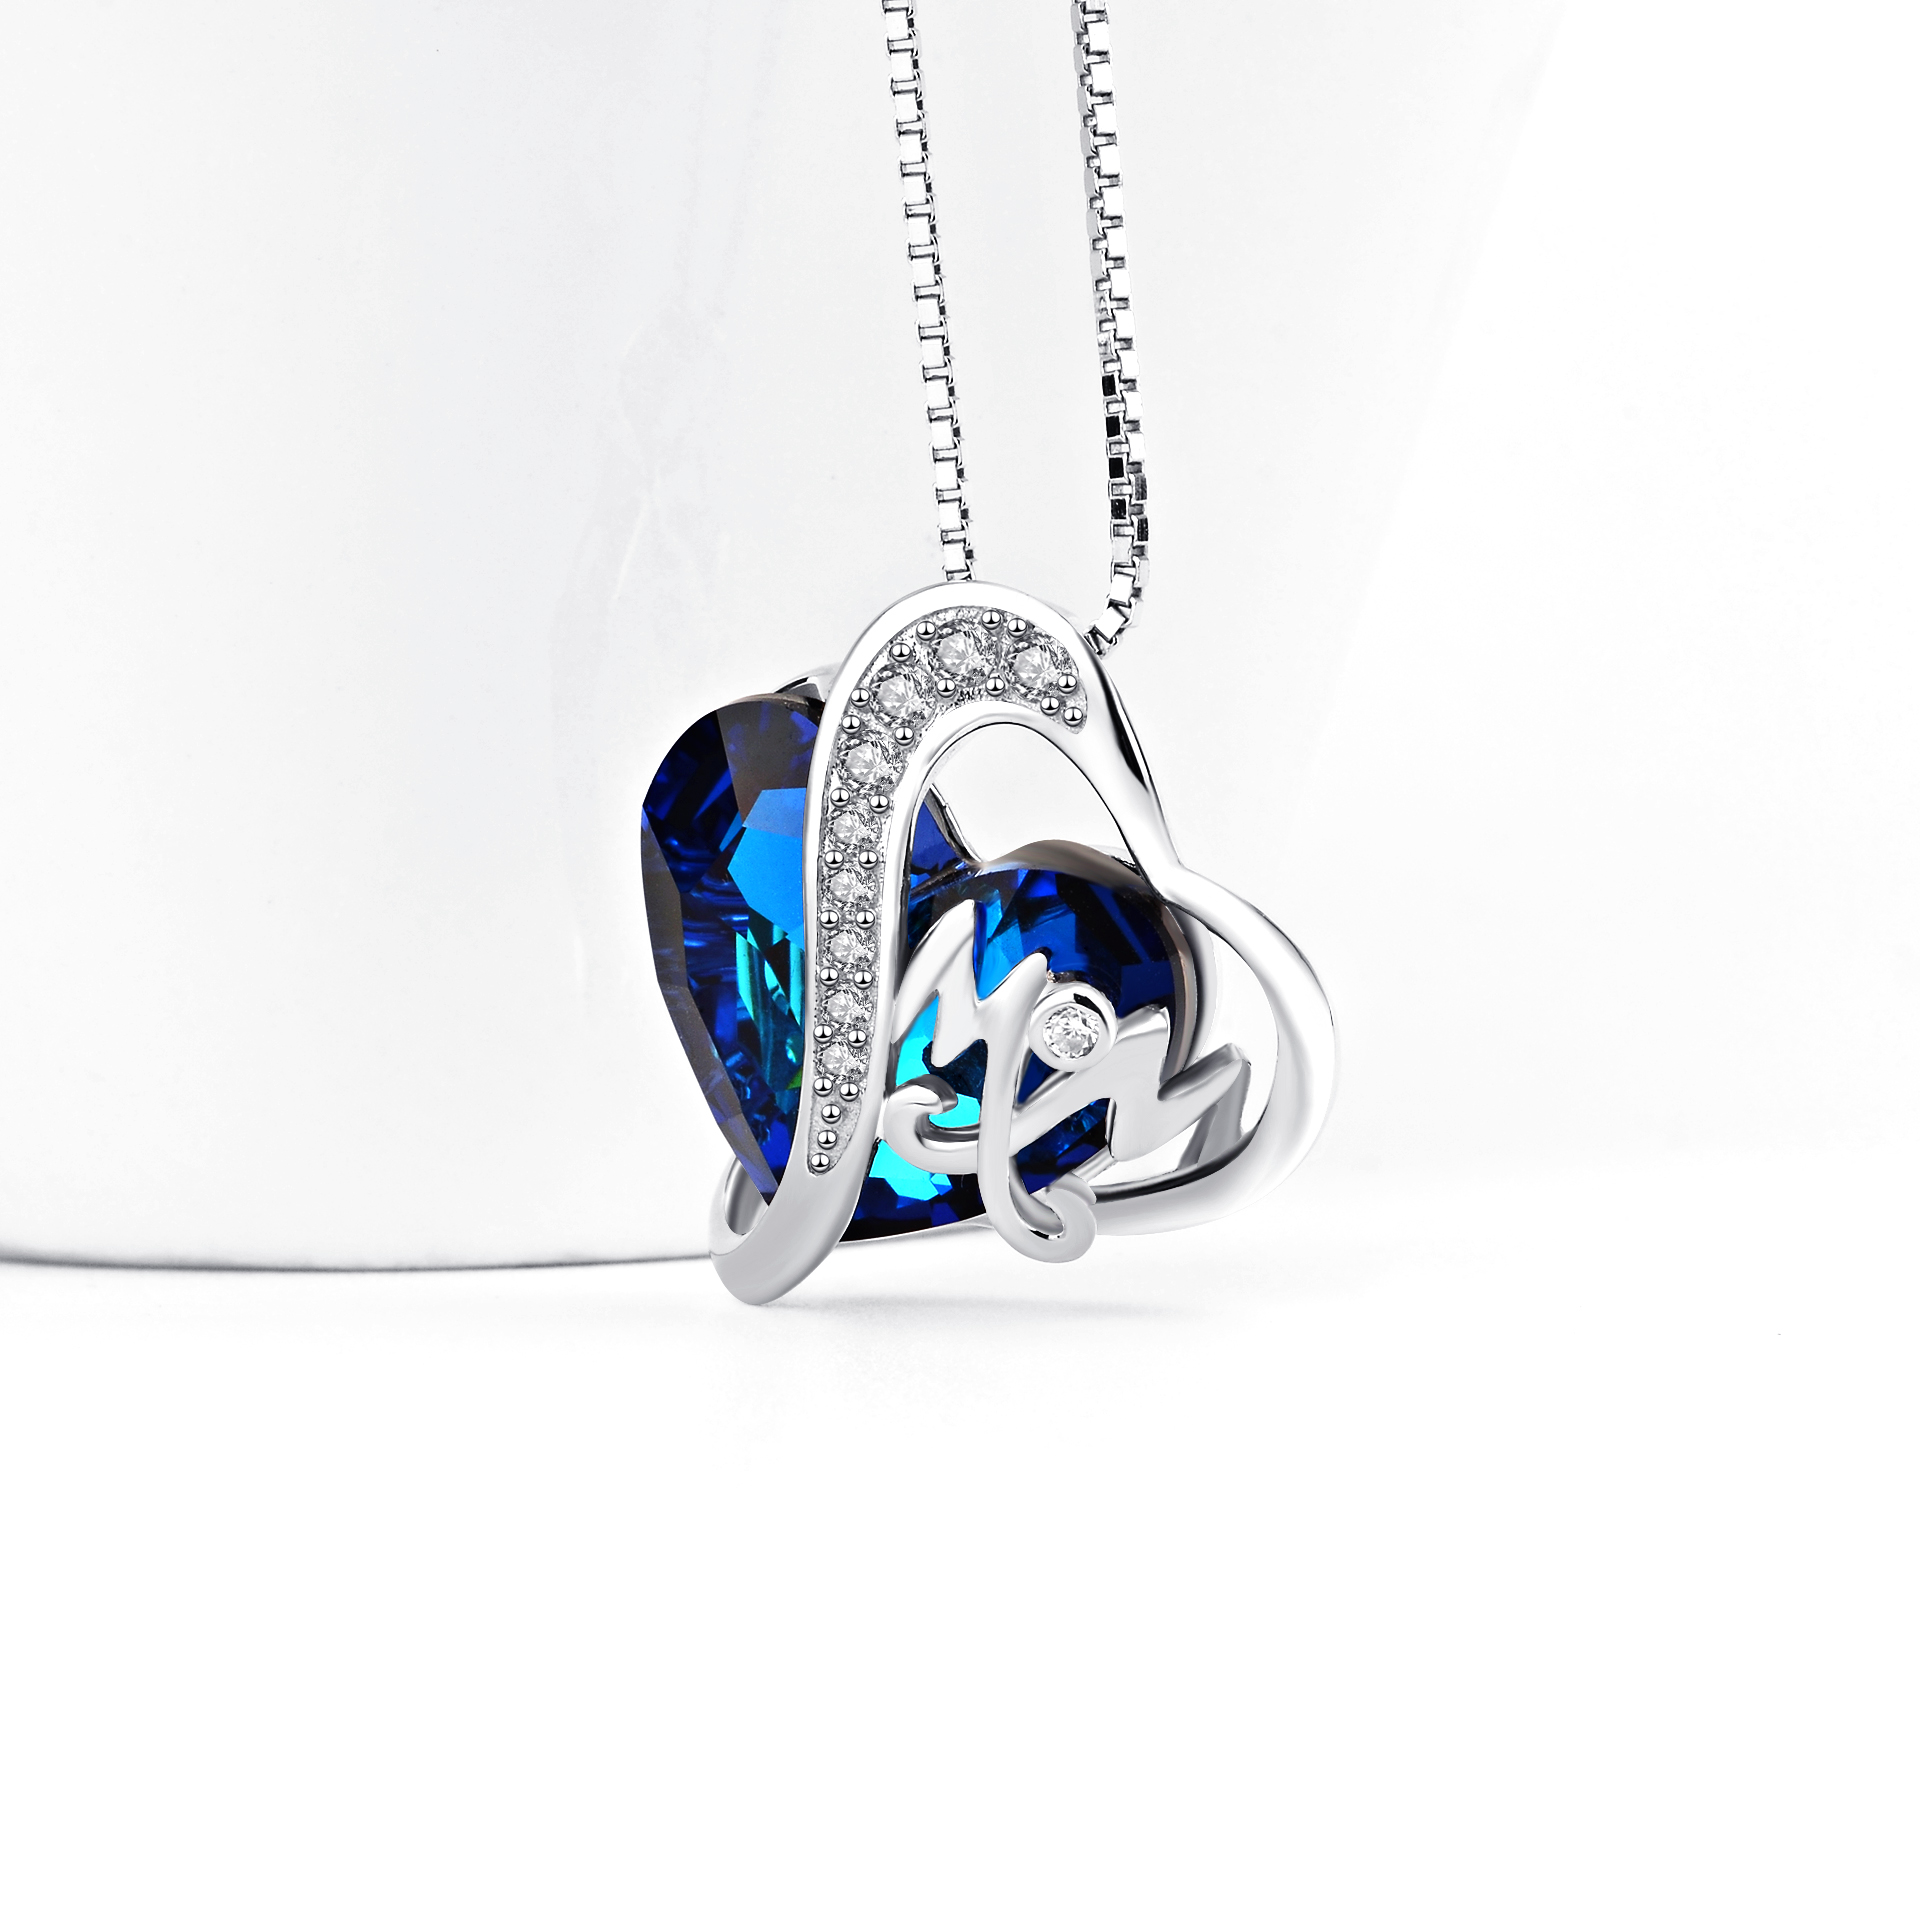 Mom Pendant Necklace Blue Heart Crystal Jewelry for Mom Grandma